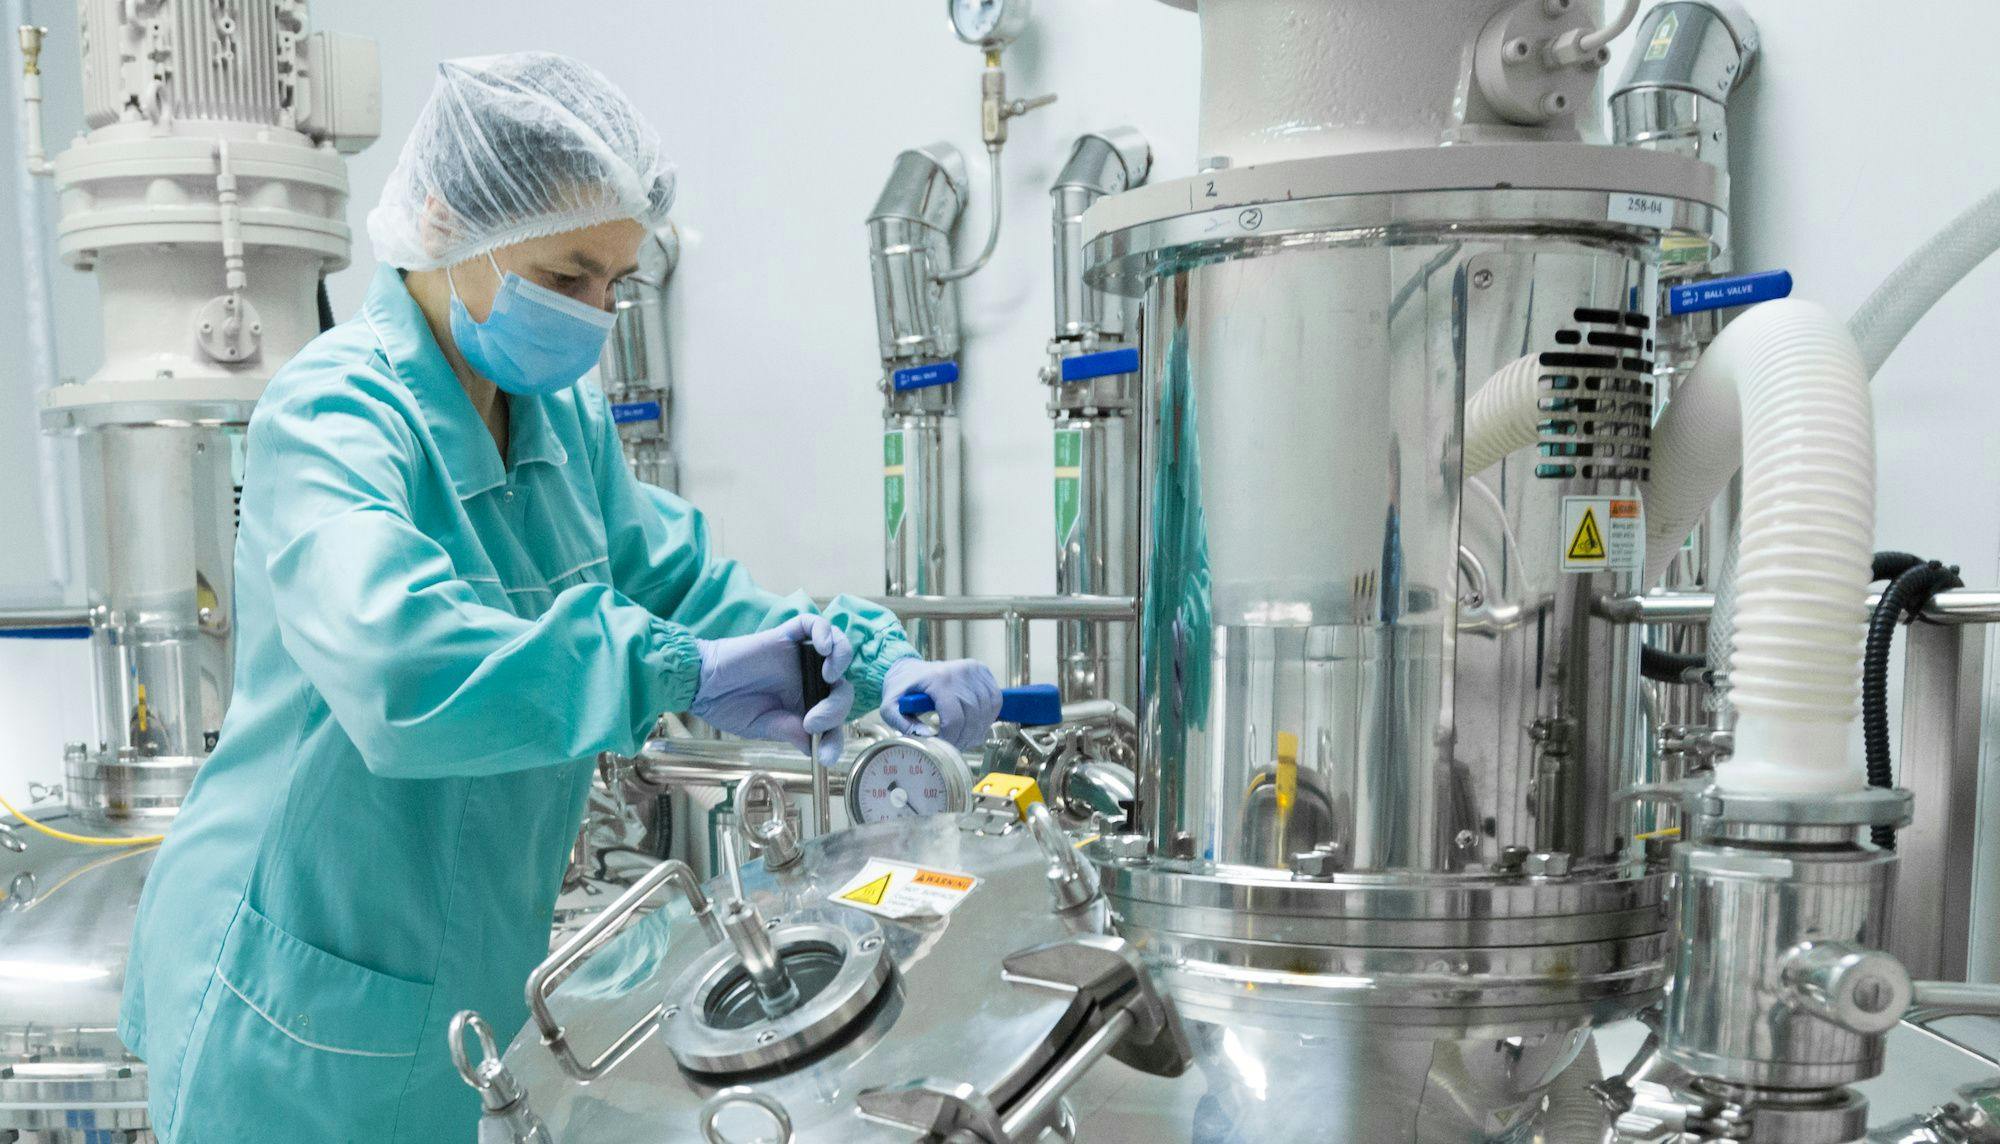 Critical power: The lifeline for pharmaceutical manufacturing